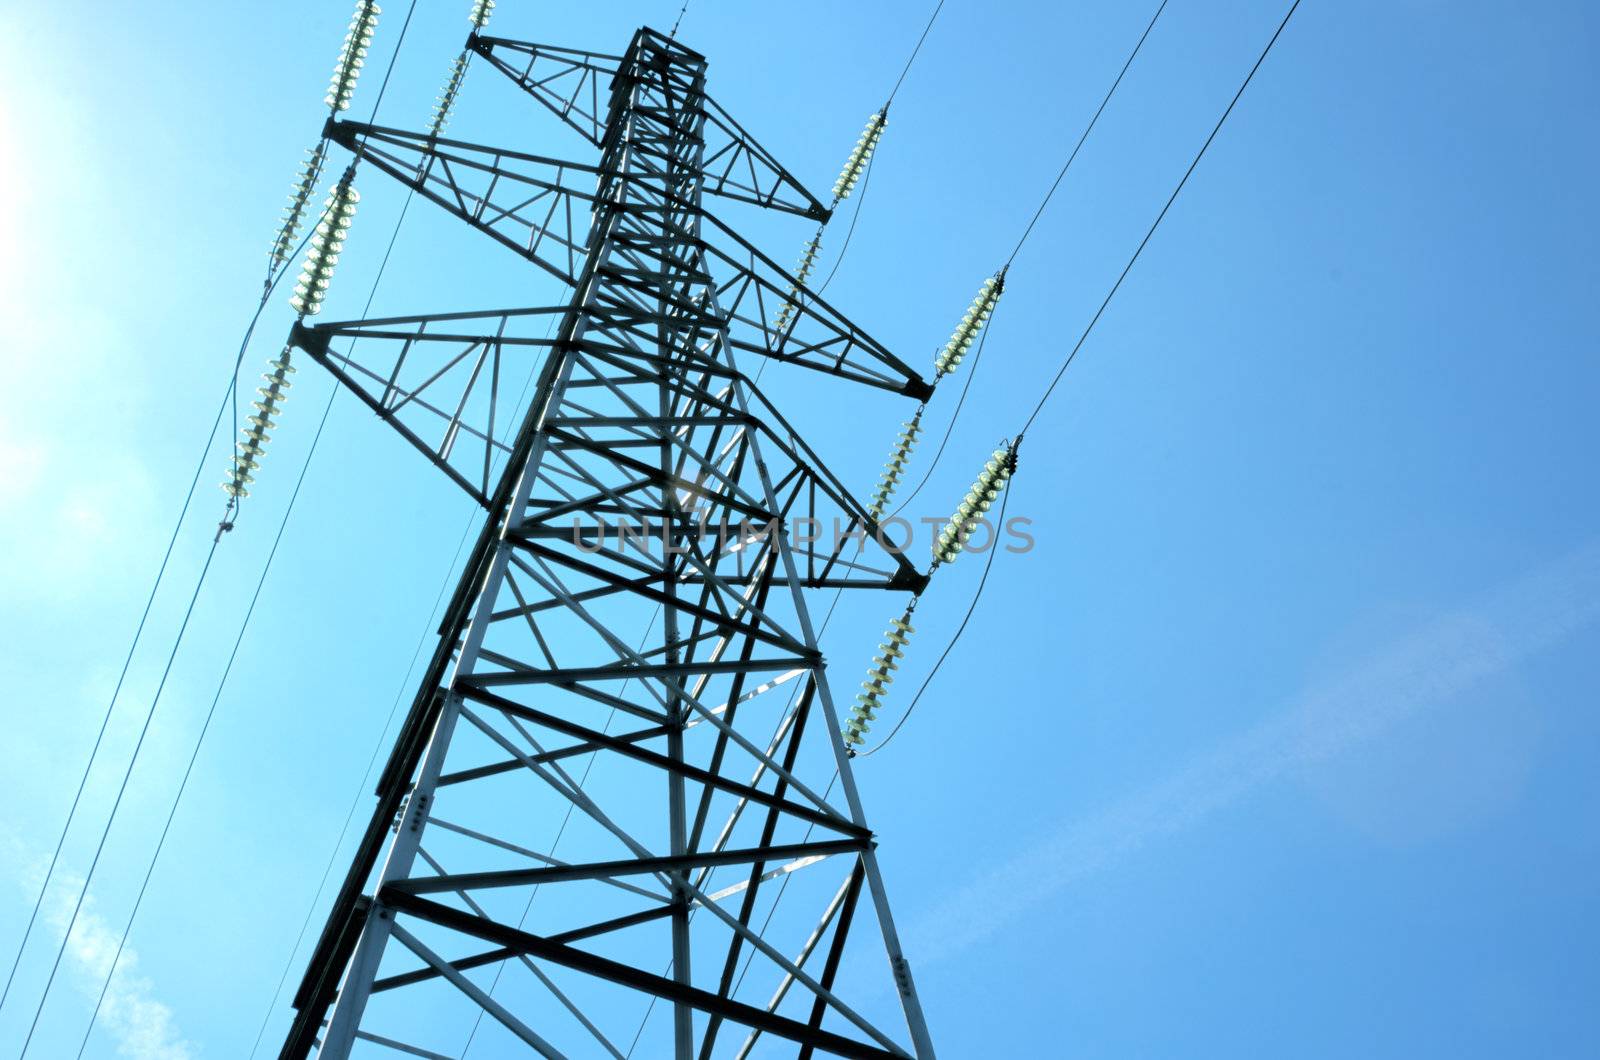 An electricity power tower against a blue sky